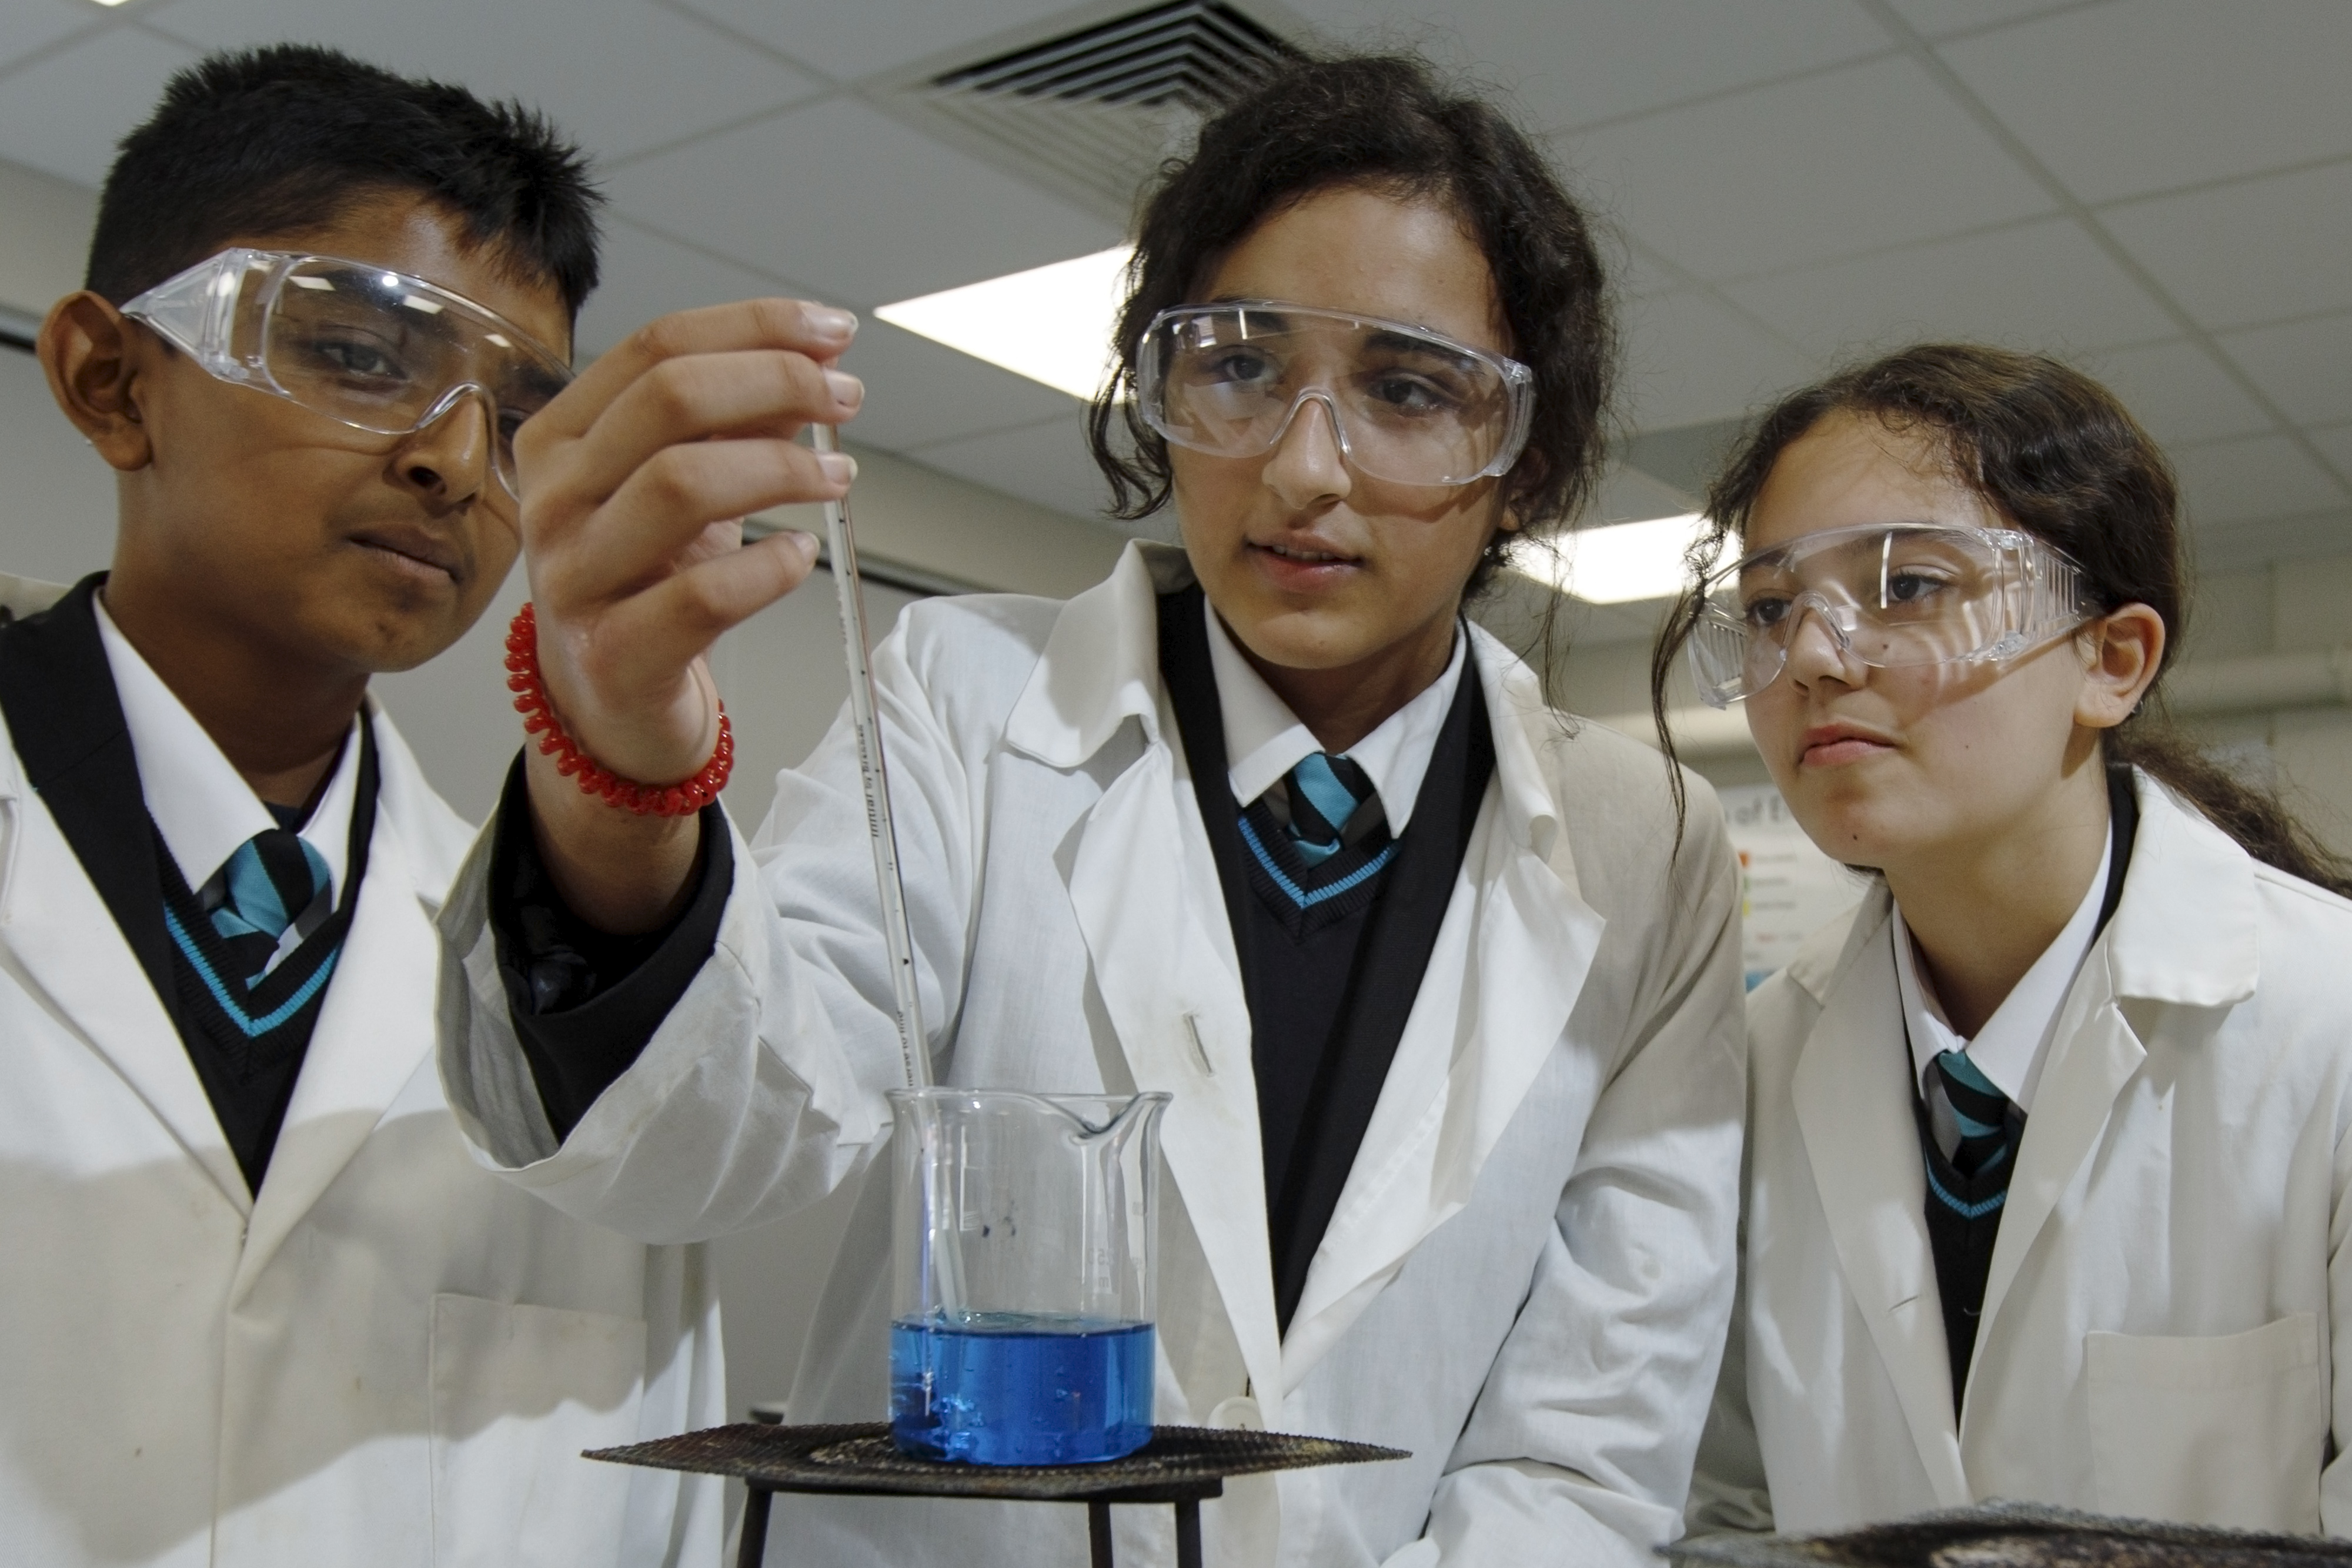 3 Year 9 pupils conduct an experiment in the science lab at Rivers Academy